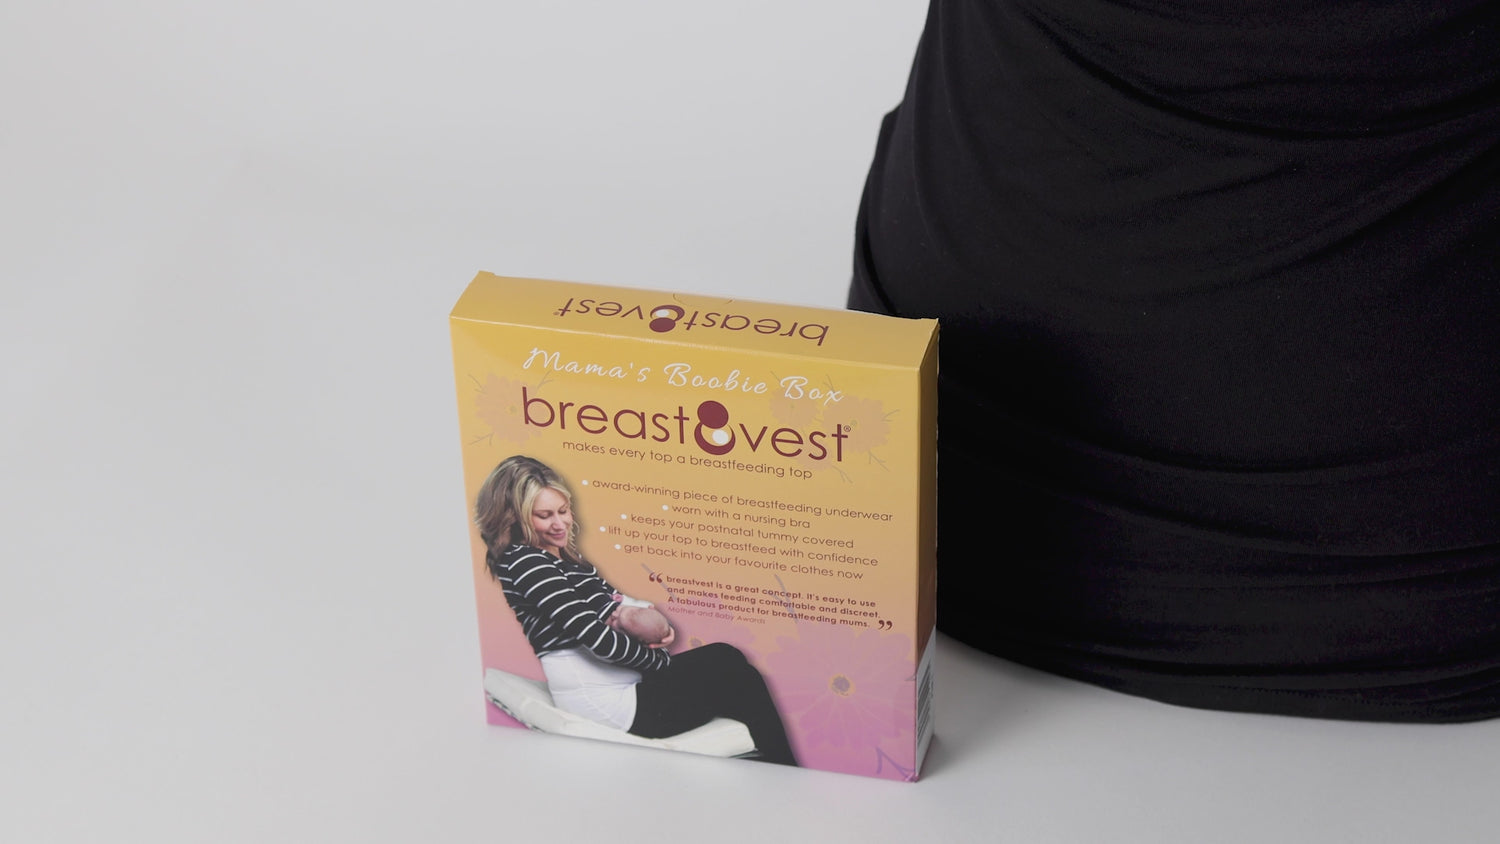 Breast Vest- Makes any top a breastfeeding top